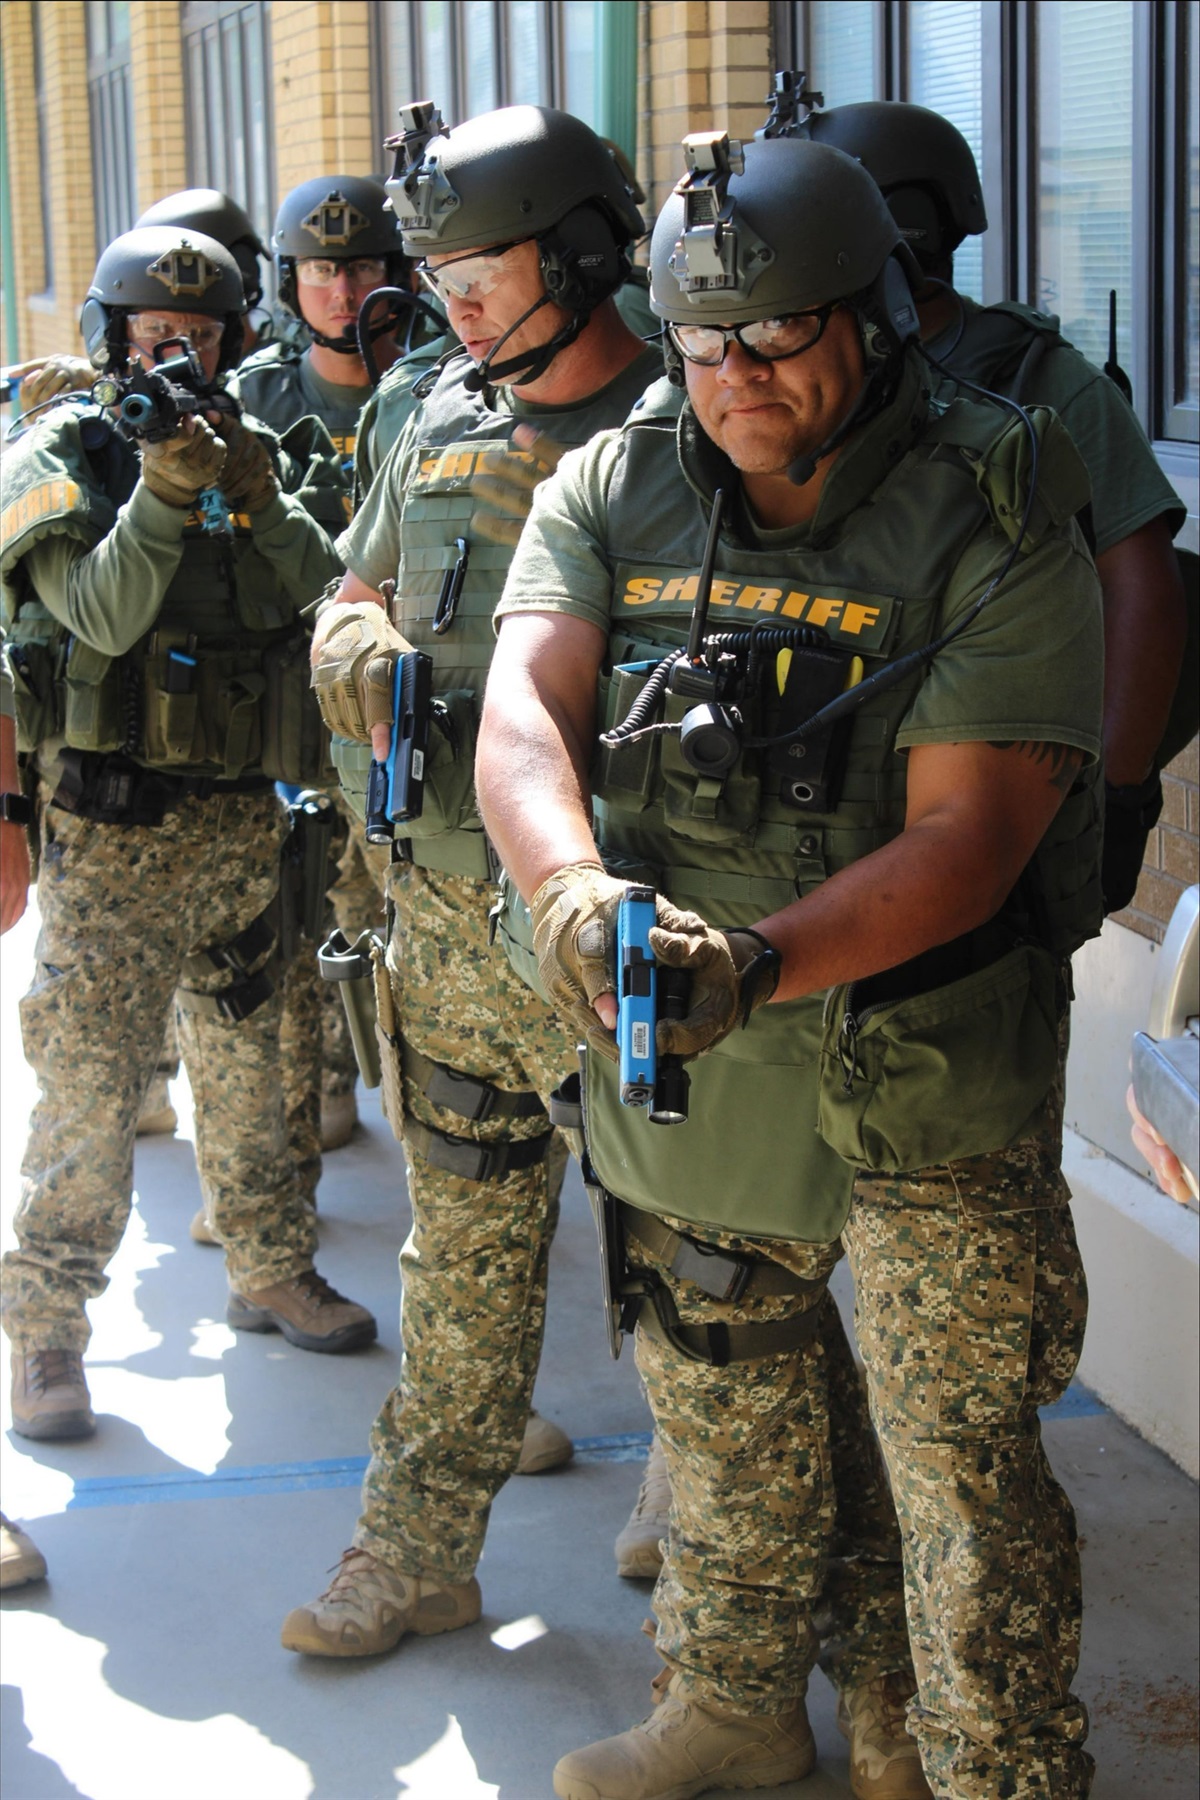 The Evolution of SWAT Operator Selection